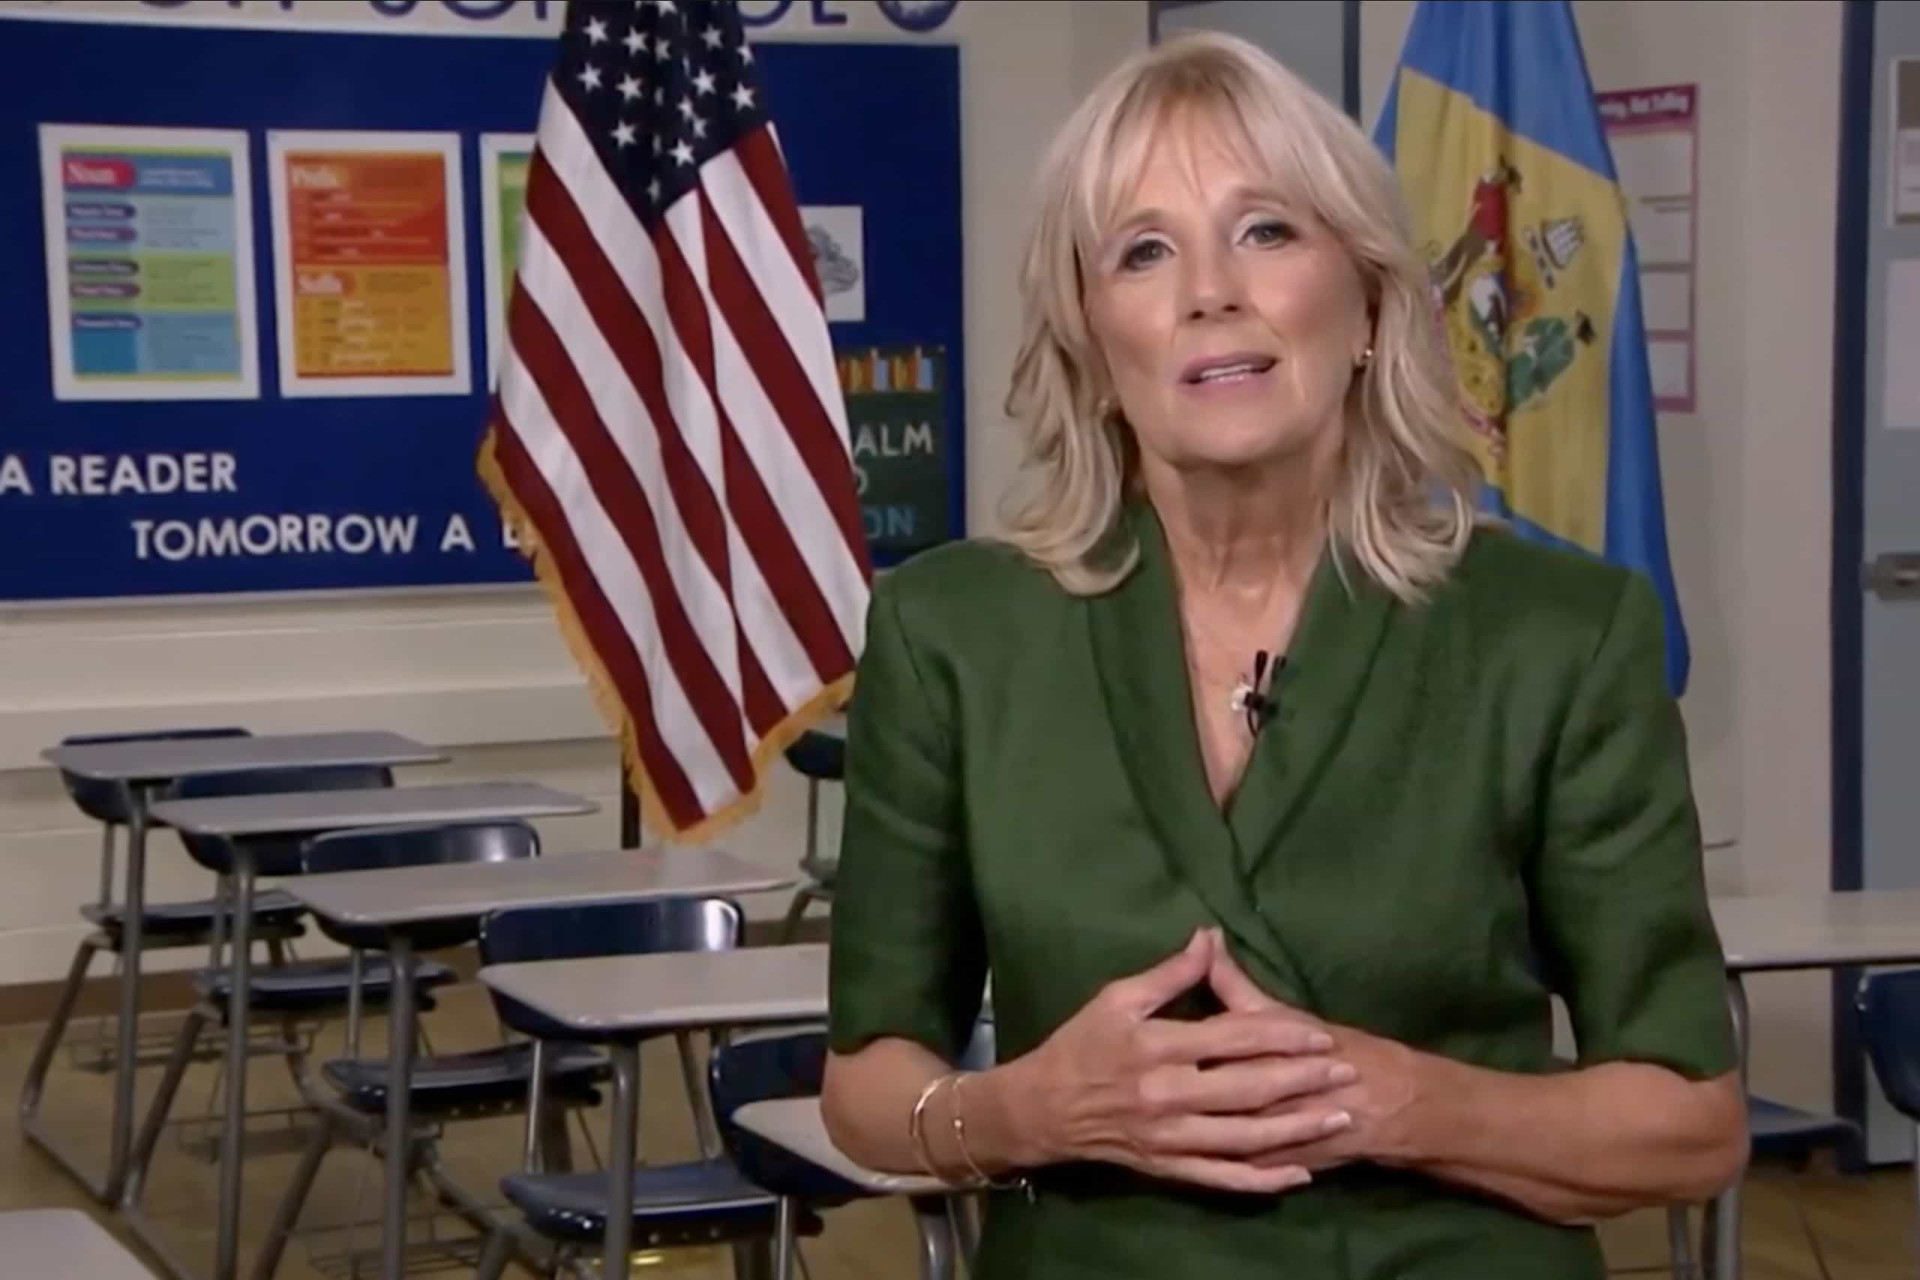 <p>Jill Biden is famously a community college teacher, the first First Lady to hold a paid job outside the White House.</p><p><a href="https://www.msn.com/en-us/community/channel/vid-7xx8mnucu55yw63we9va2gwr7uihbxwc68fxqp25x6tg4ftibpra?cvid=94631541bc0f4f89bfd59158d696ad7e">Follow us and access great exclusive content every day</a></p>